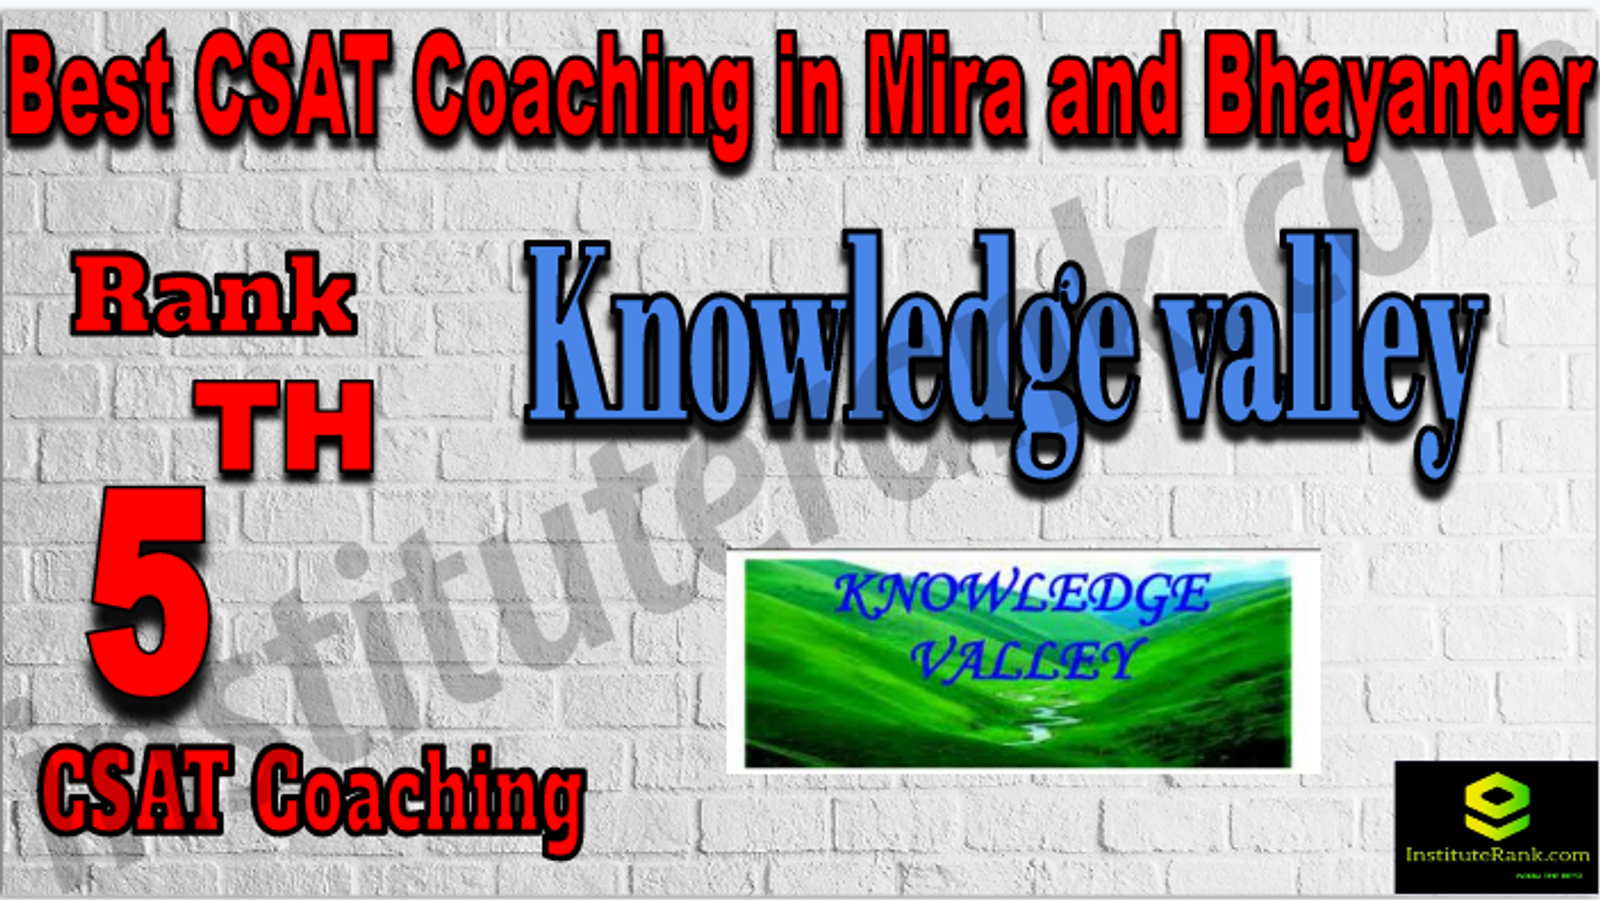 5TH CSAT Coaching in Mira and Bhayander